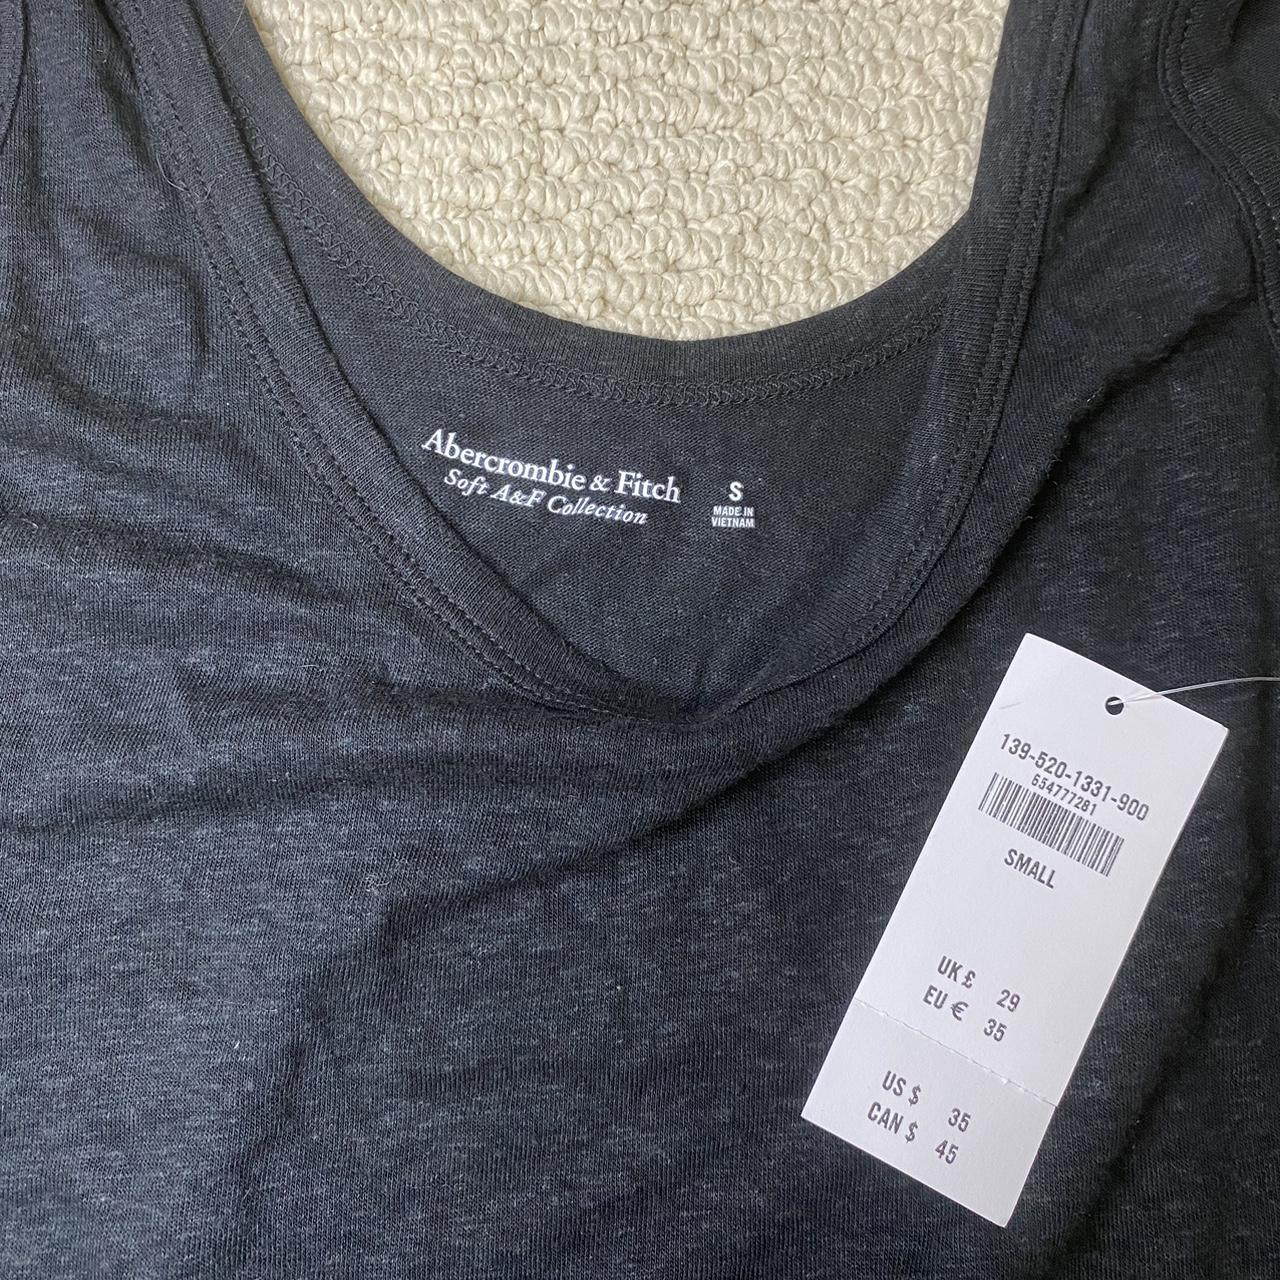 Abercrombie Fitch Soft A&F Collection Women's Small Black